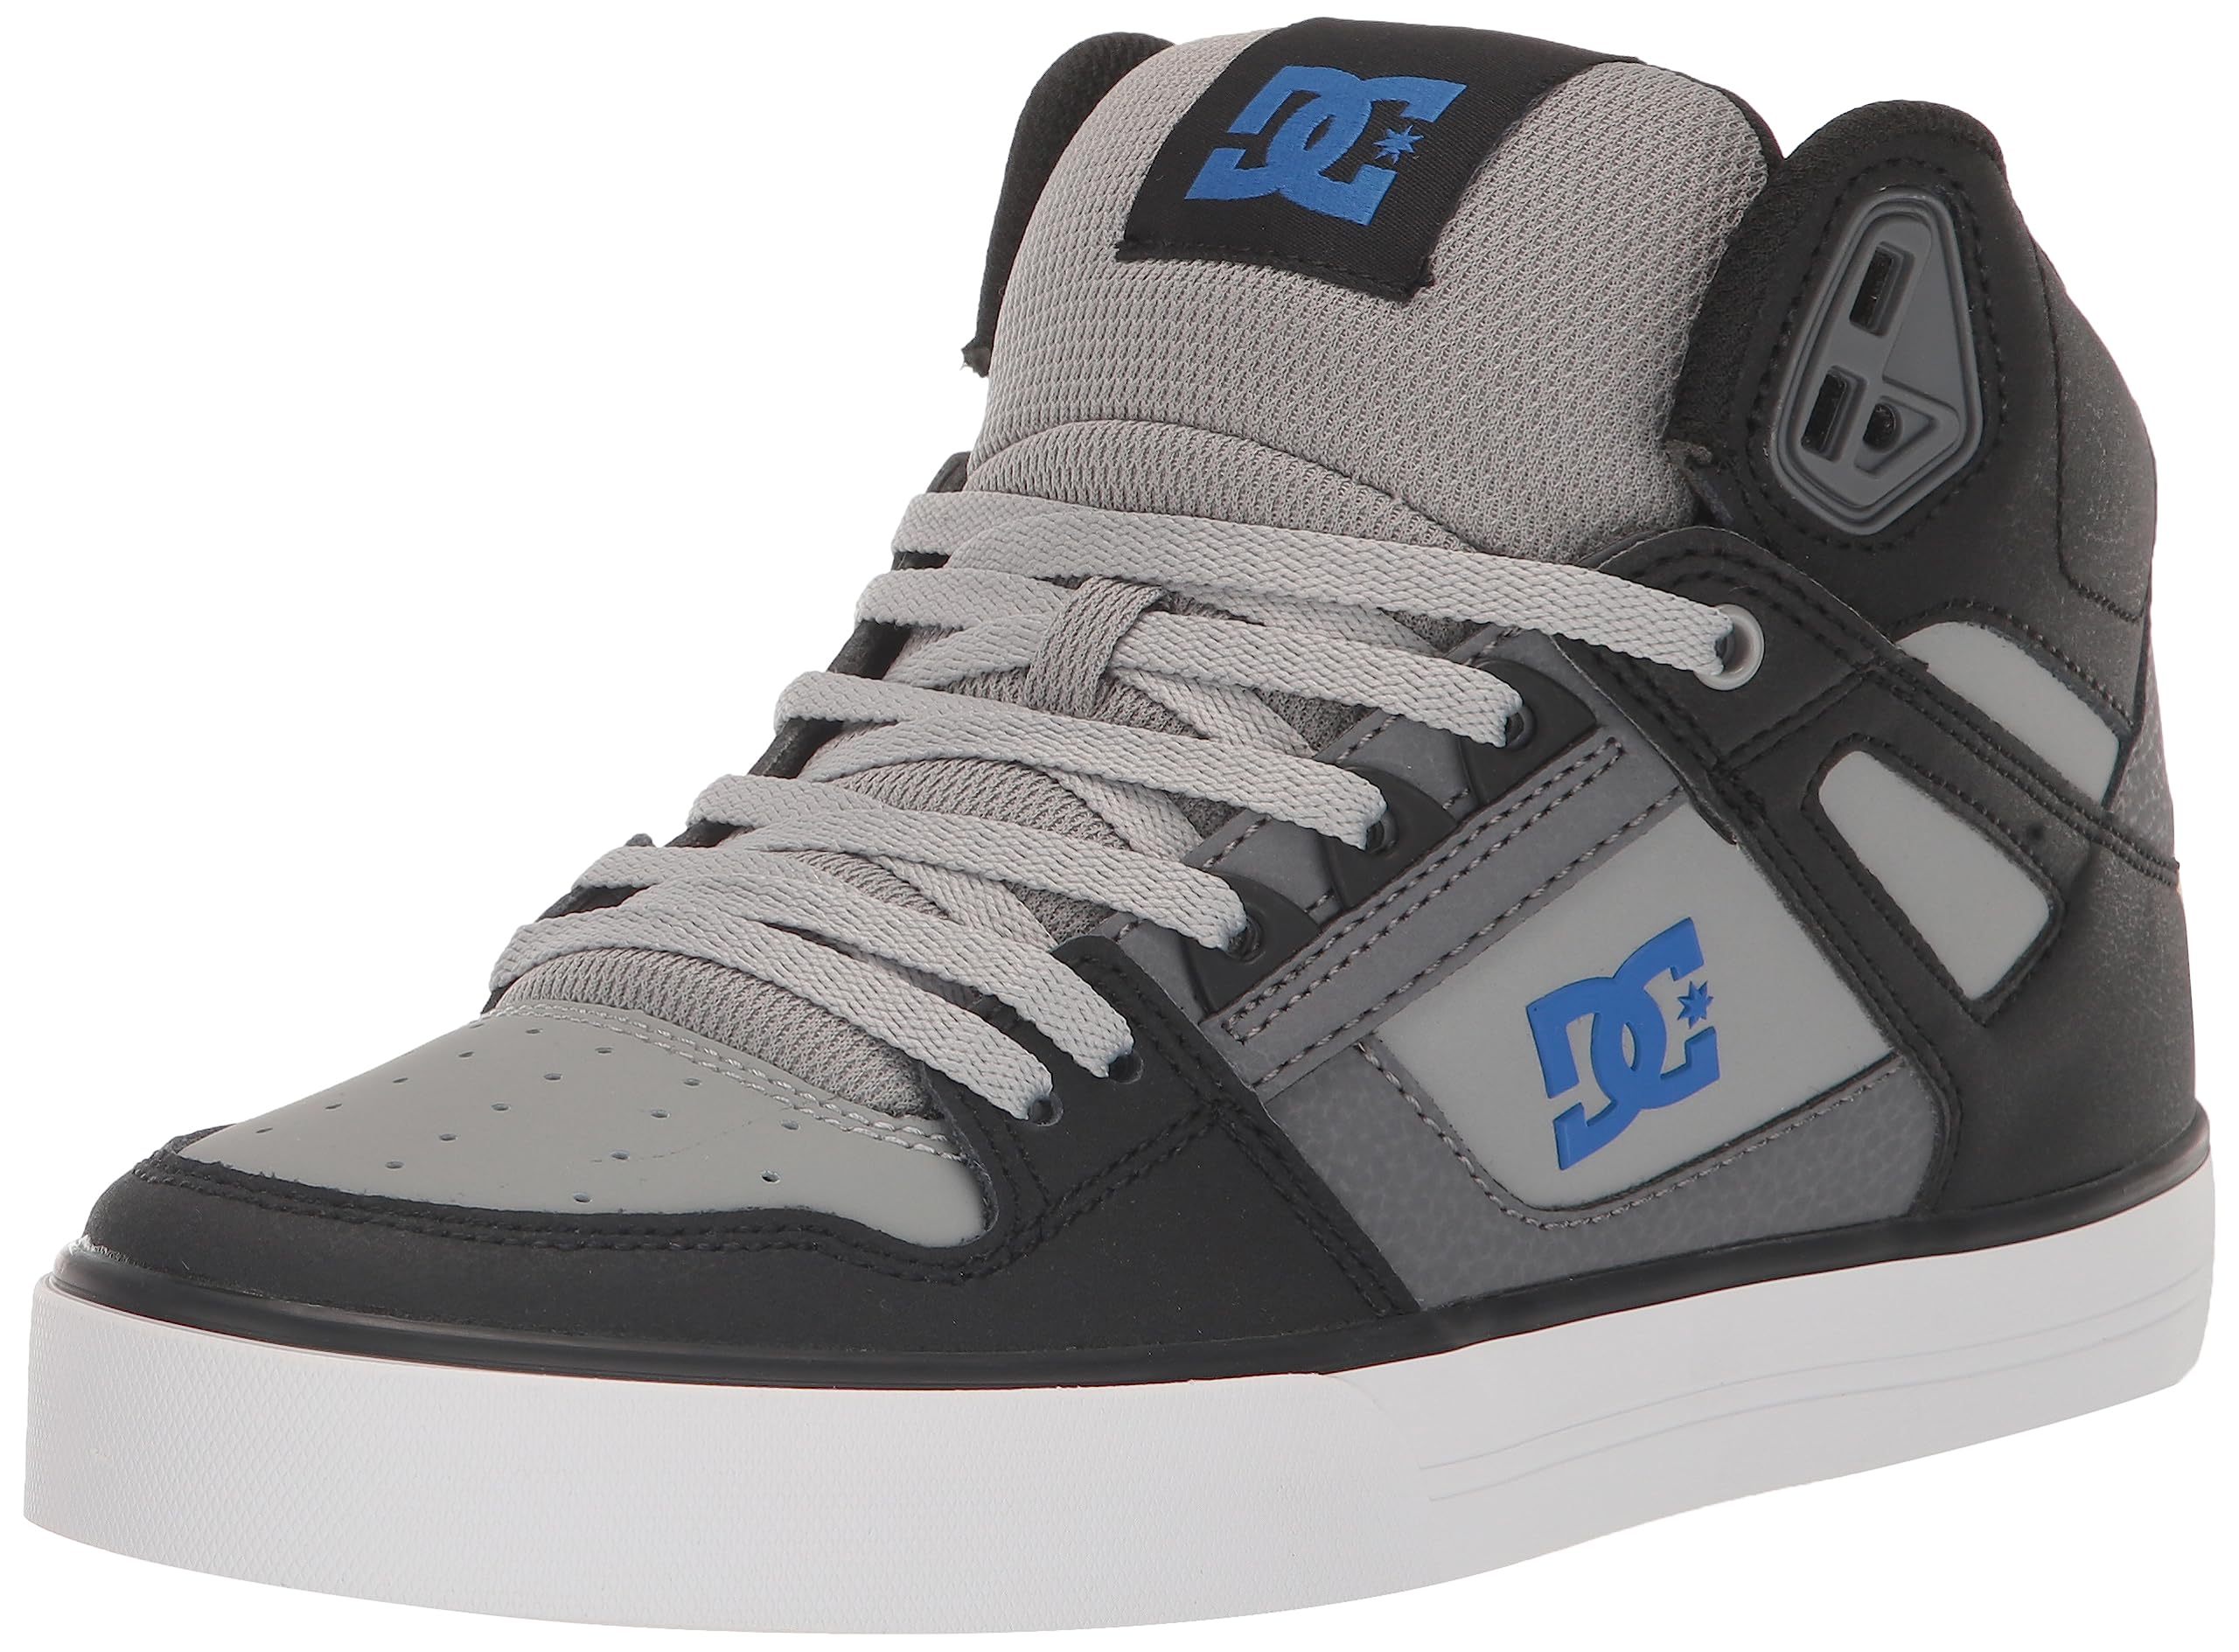 DC Men's Pure High Top Wc Skate Shoes Casual Sneakers